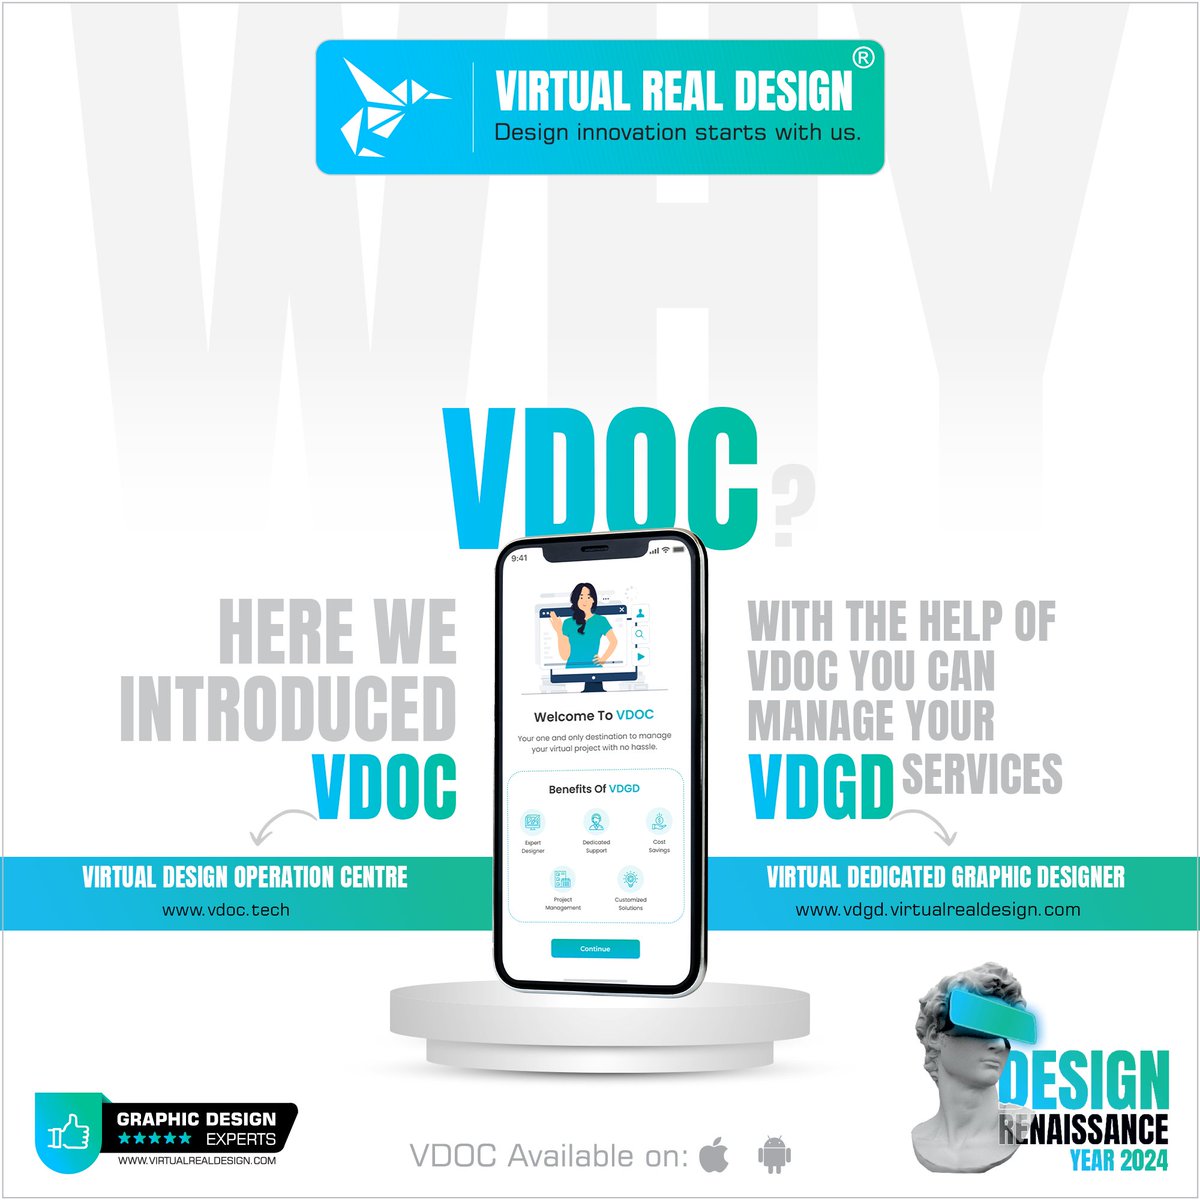 Experience design like never before with VDOC - the innovative fusion of our renowned Virtual Dedicated Graphic Designer (VDGD) service and cutting-edge technology!
#VirtualRealDesign #VDGD #VRDRooms #DesignRenaissanceYear2024 #ProjectManagement #TeamCollaboration